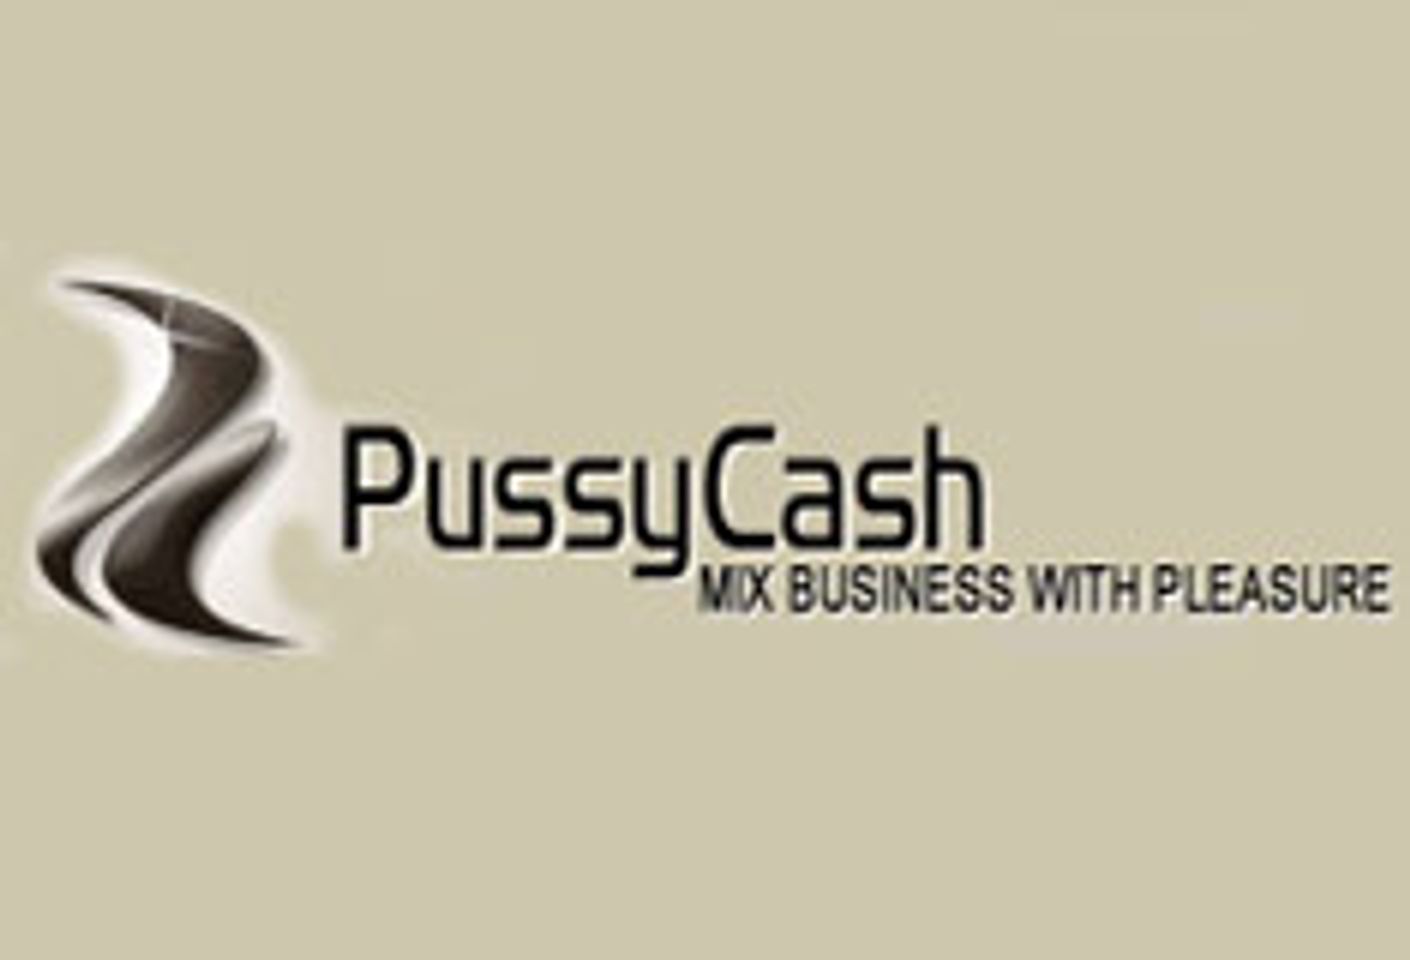 PussyCash to Add New Site Weekly